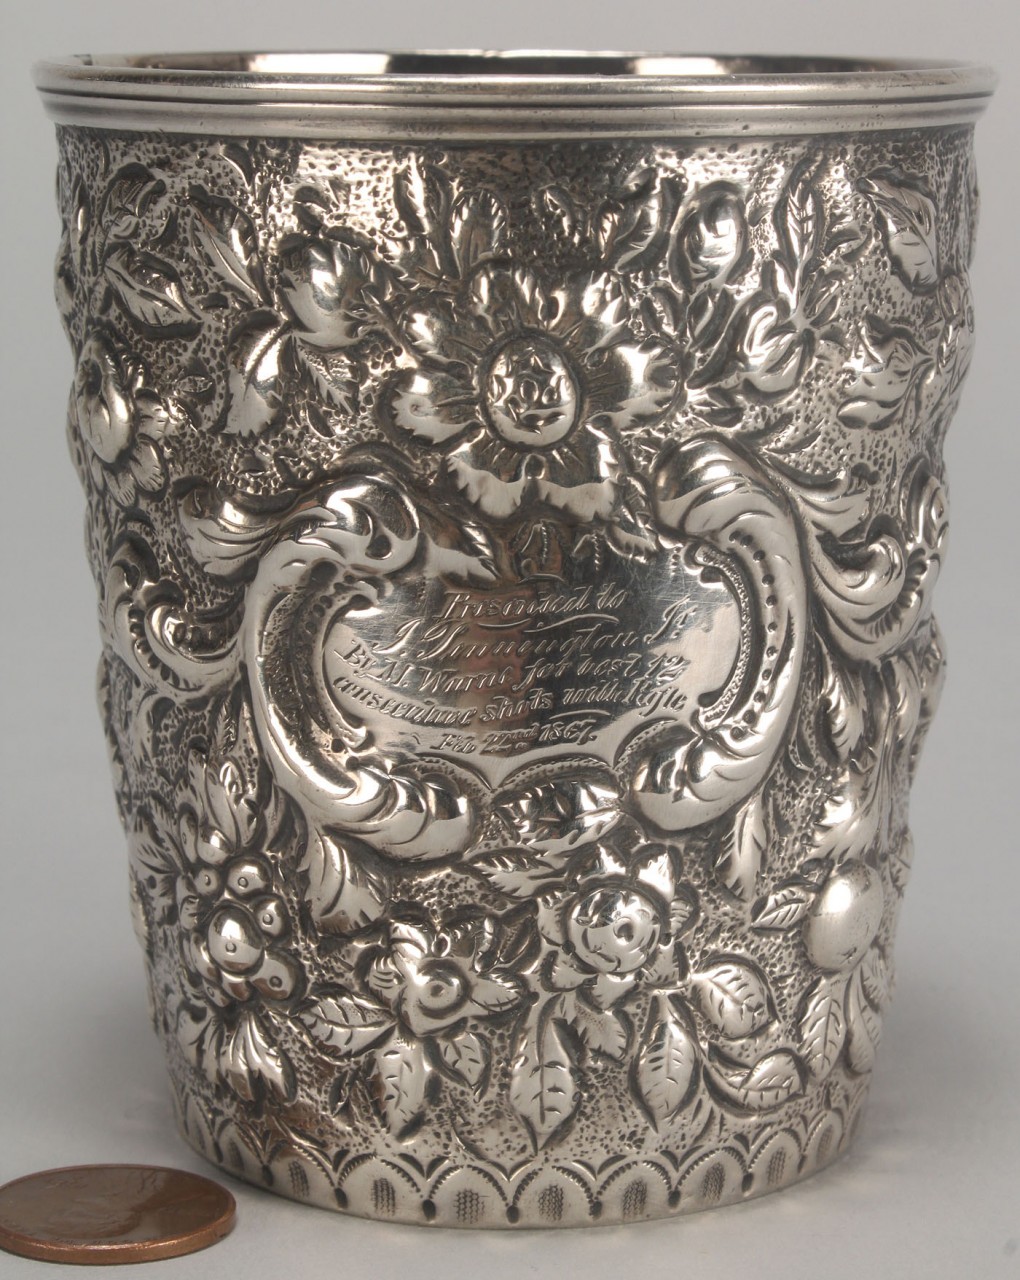 Lot 120: Kirk Repousse silver sporting presentation cup